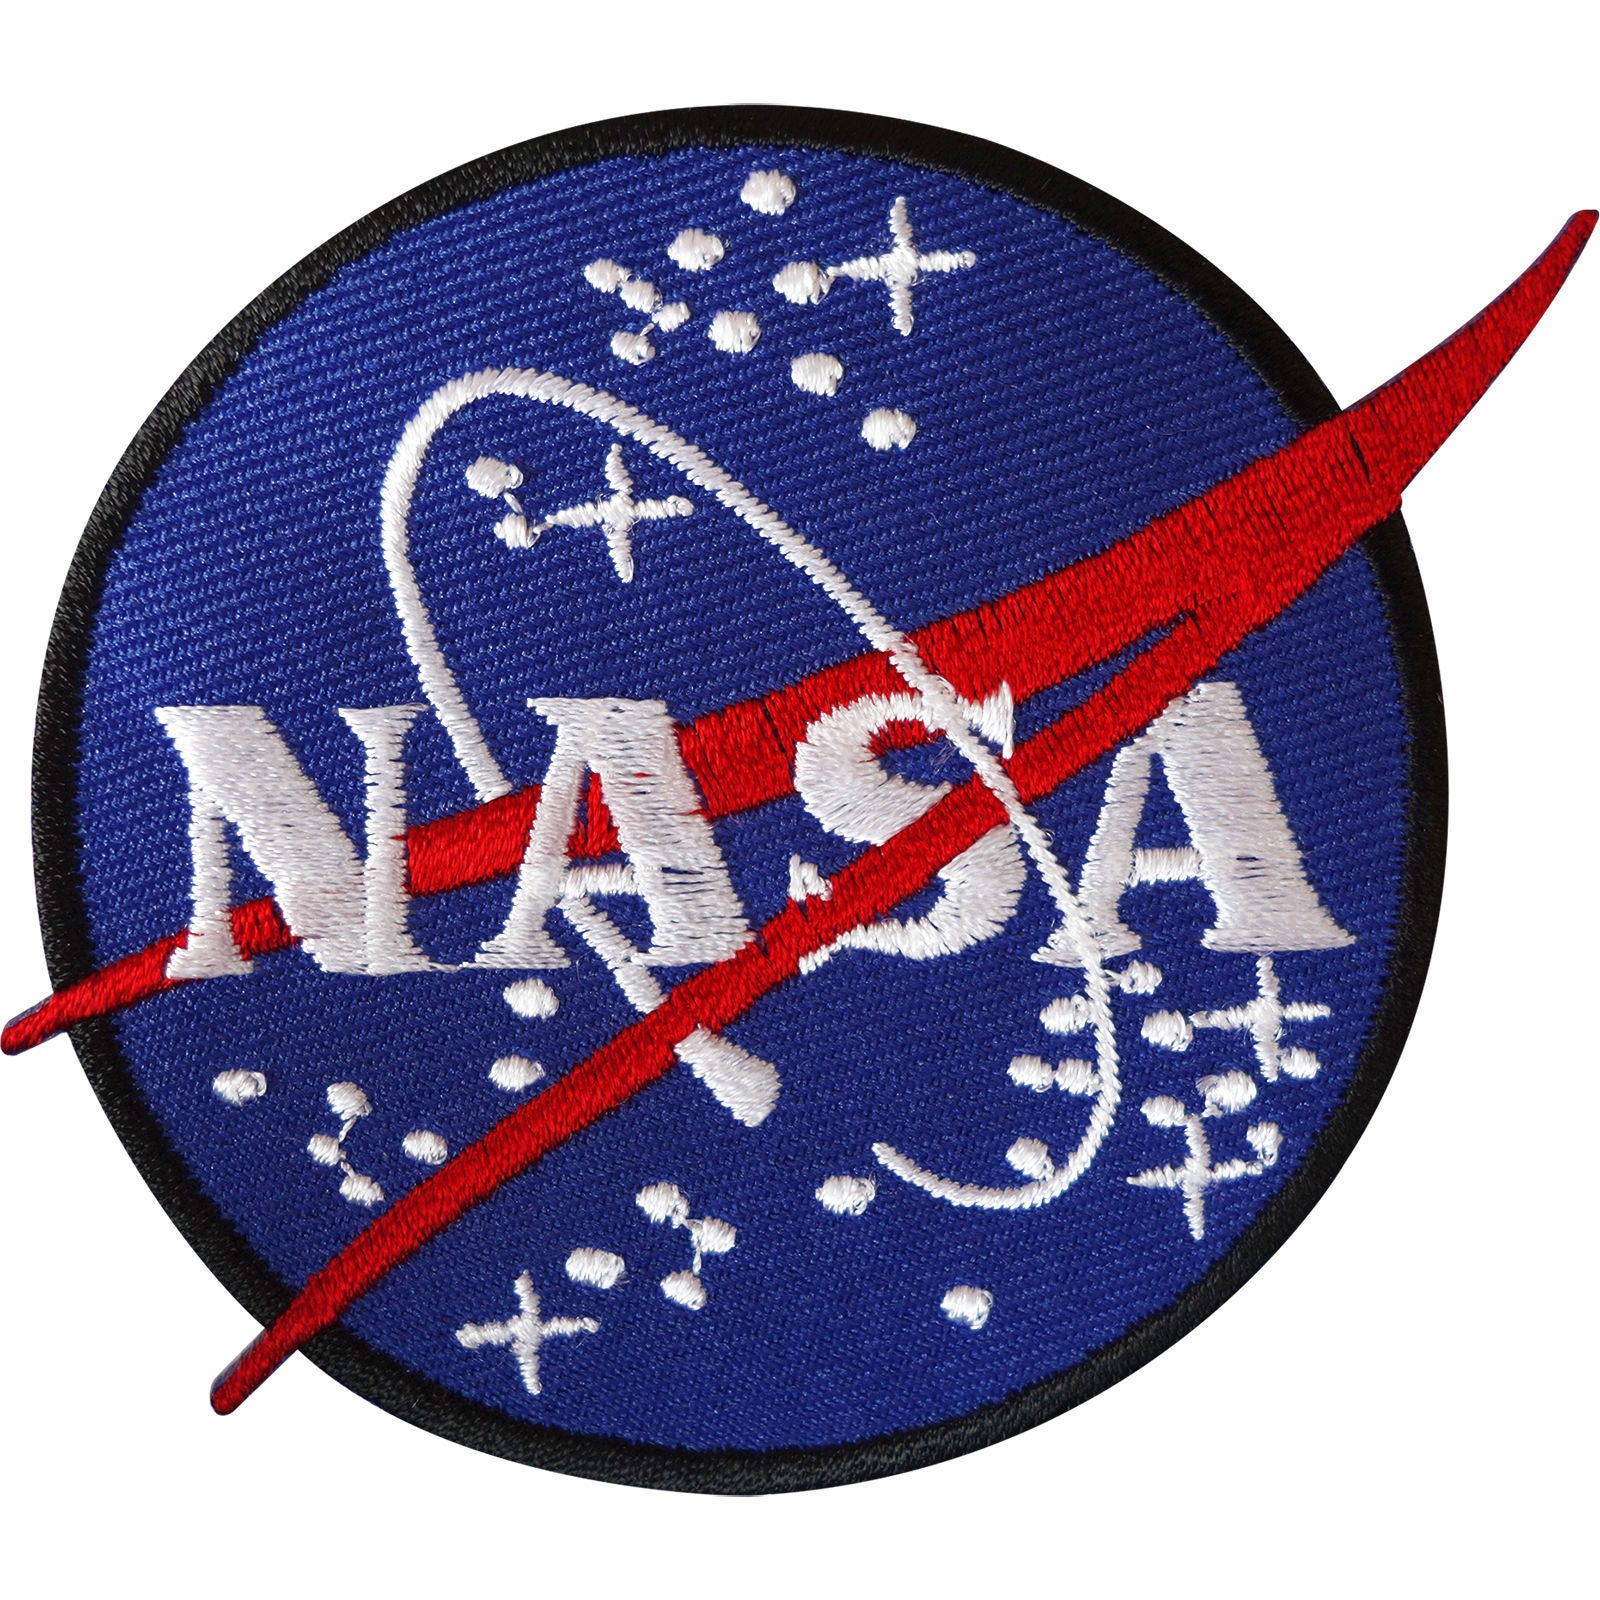 NASA SPACE ASTRONAUT JUPITER Embroidered Patch Iron-On Sew-On Motif Applique